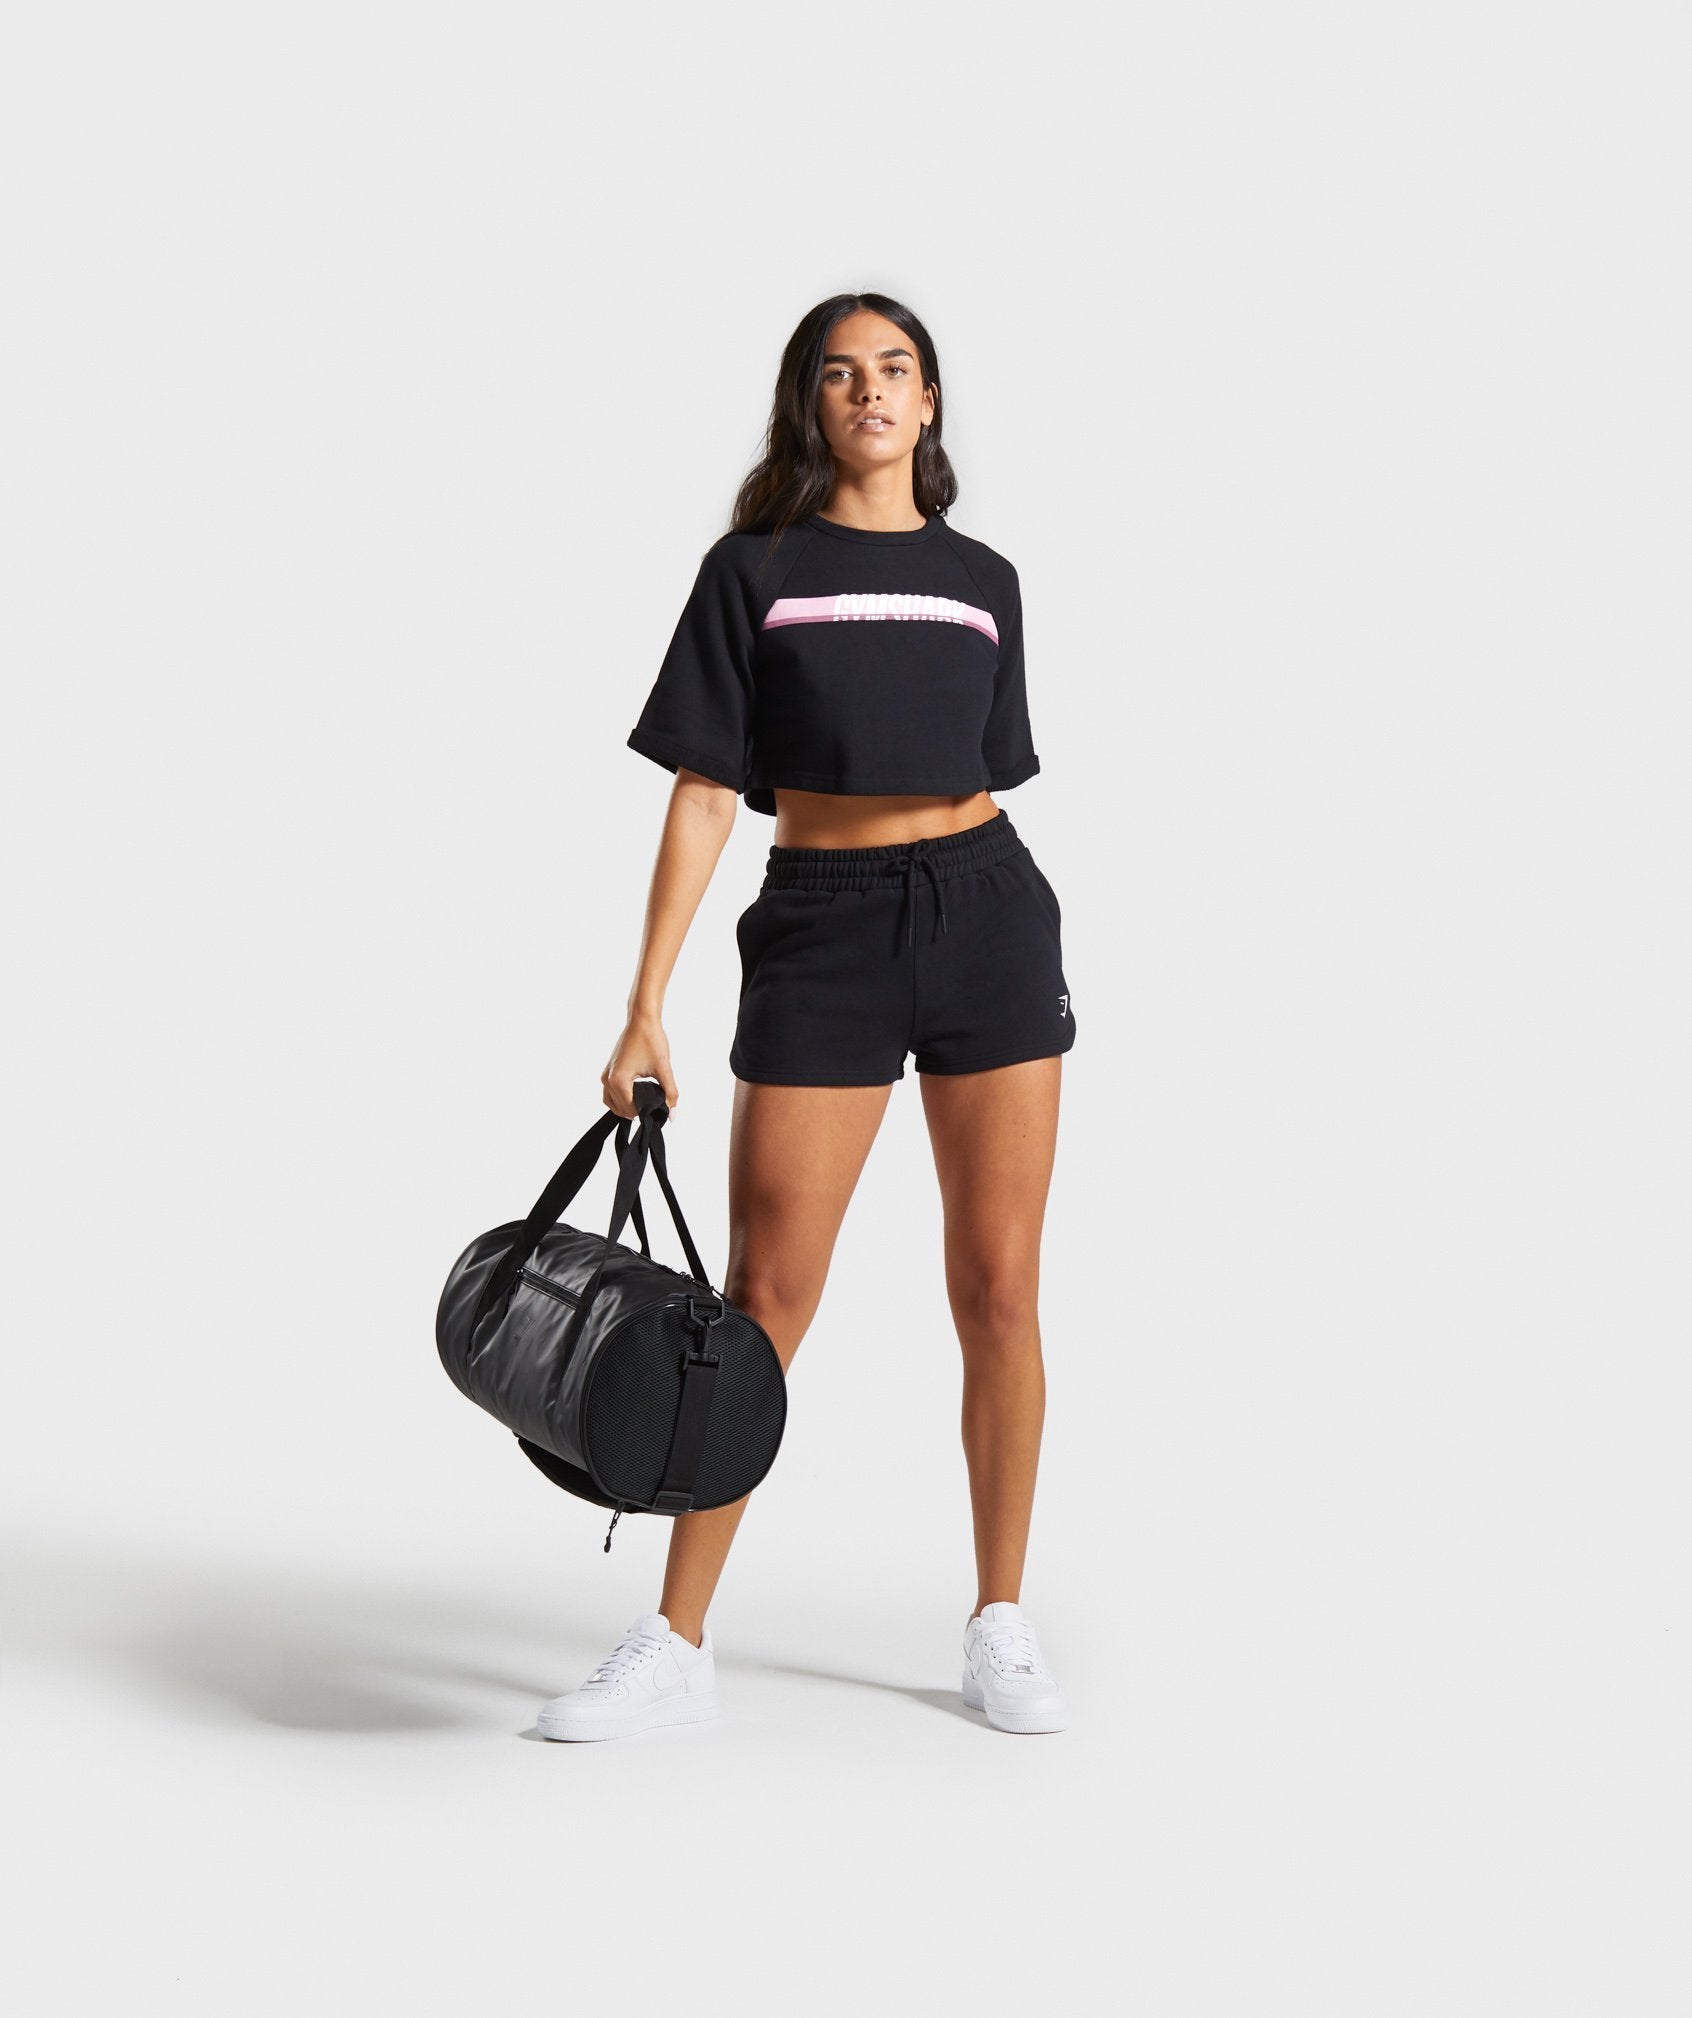 Dash Boxy Crop Top in Black - view 4